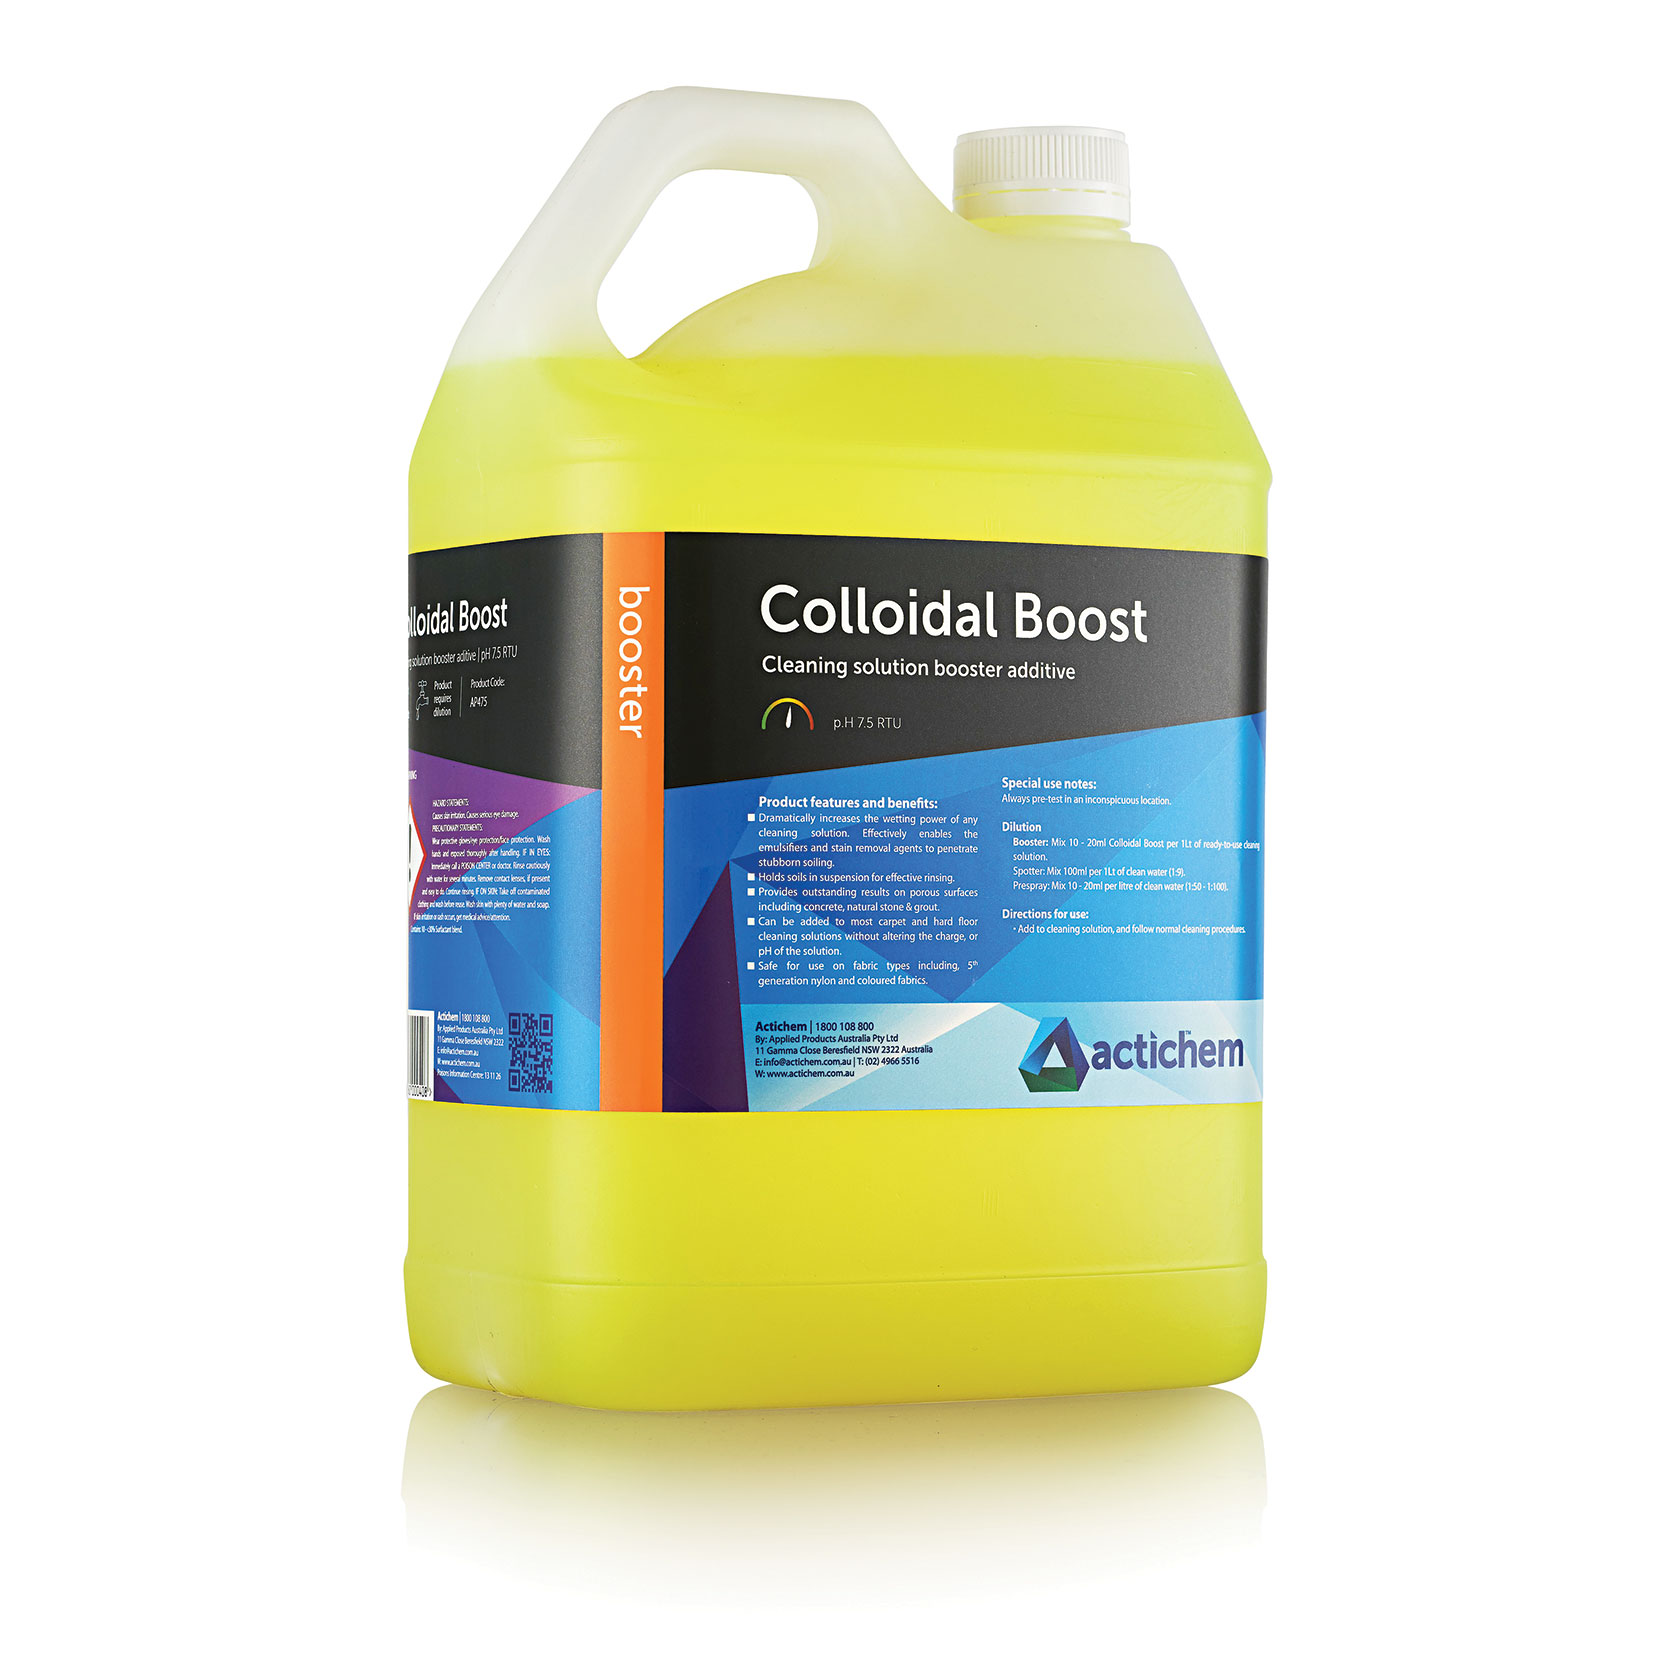 Actichem Colloidal Boost Cleaning booster additive